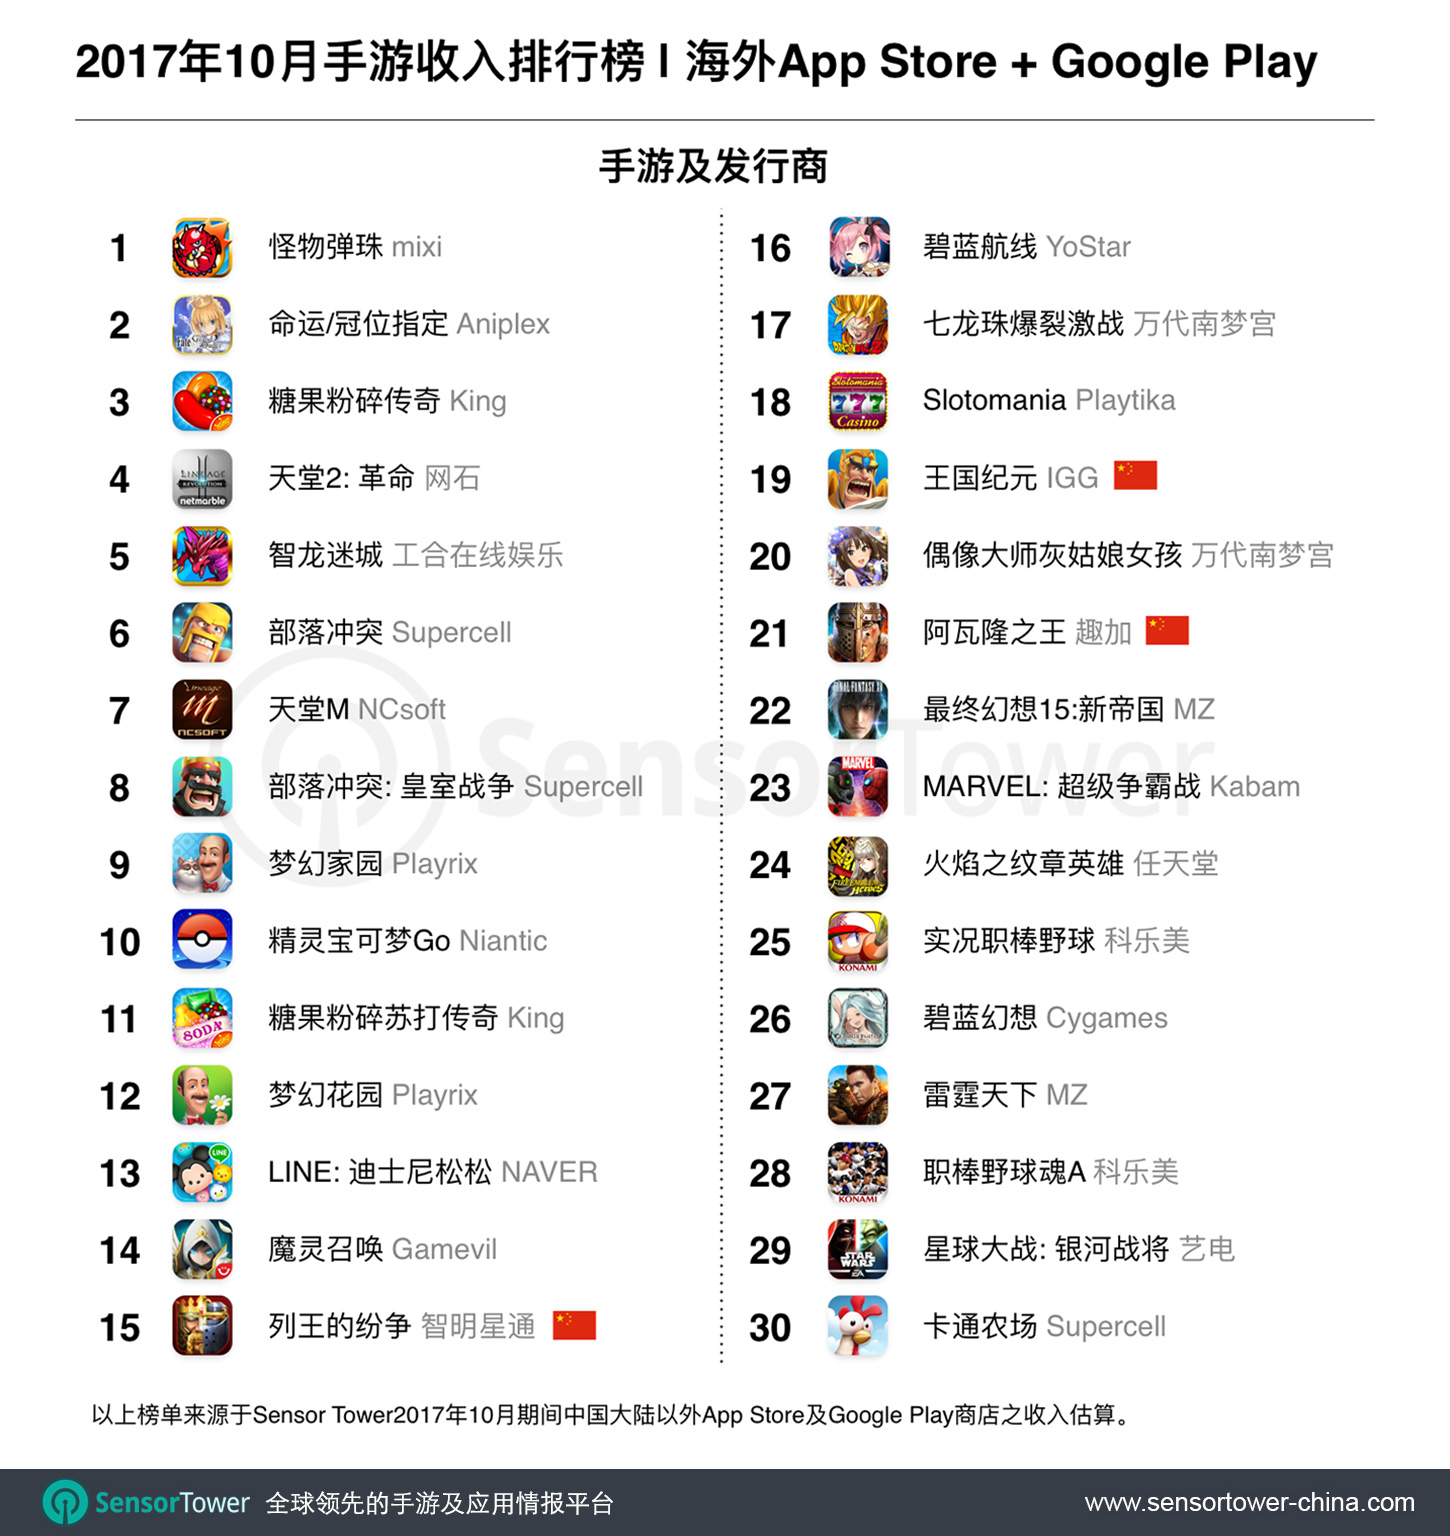 Oct 2017 Top 30 Grossing Games Outside China